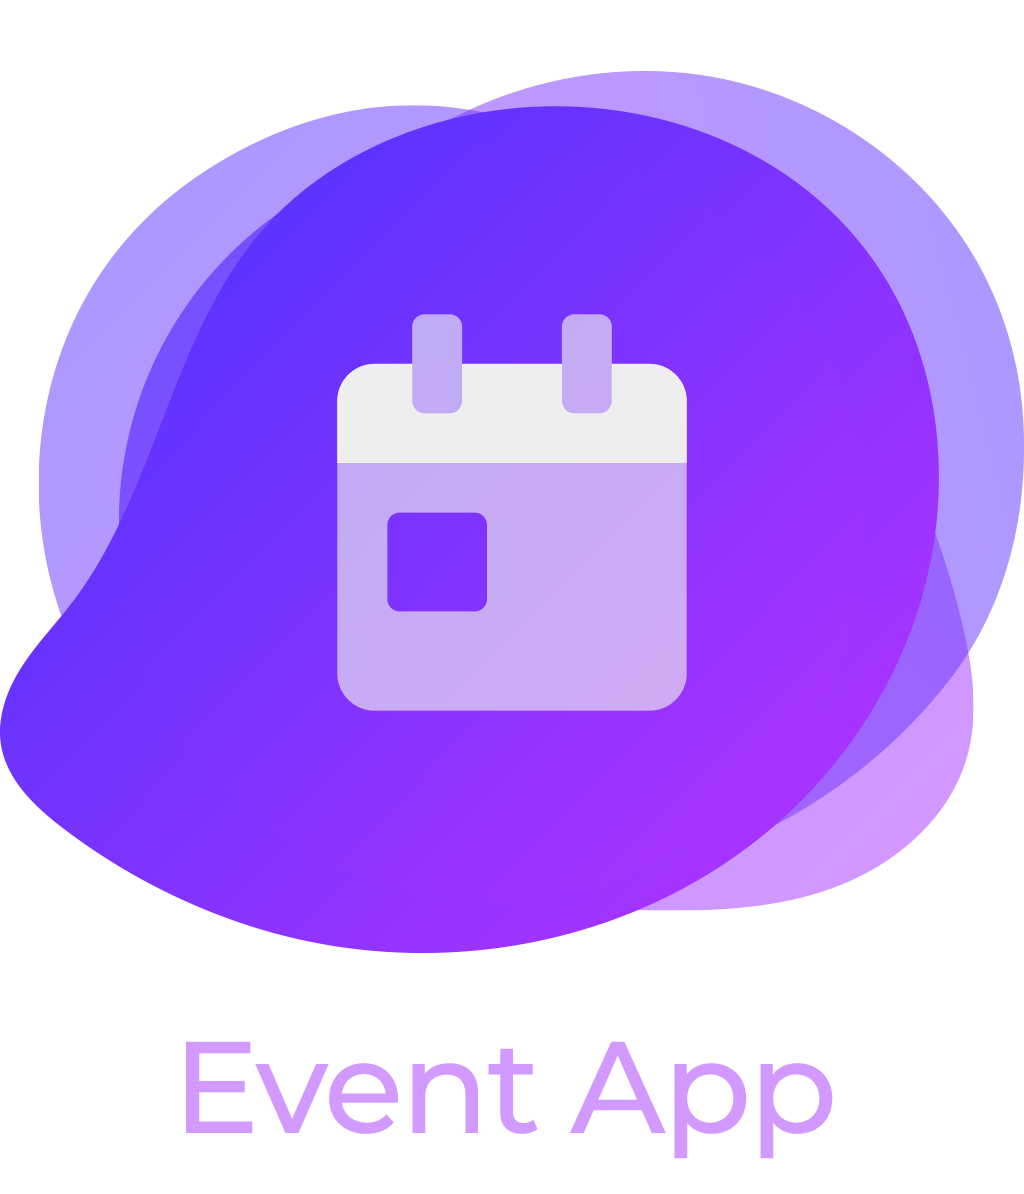 The Frontdesk event app helps event planning and execution for organizers and attendees.